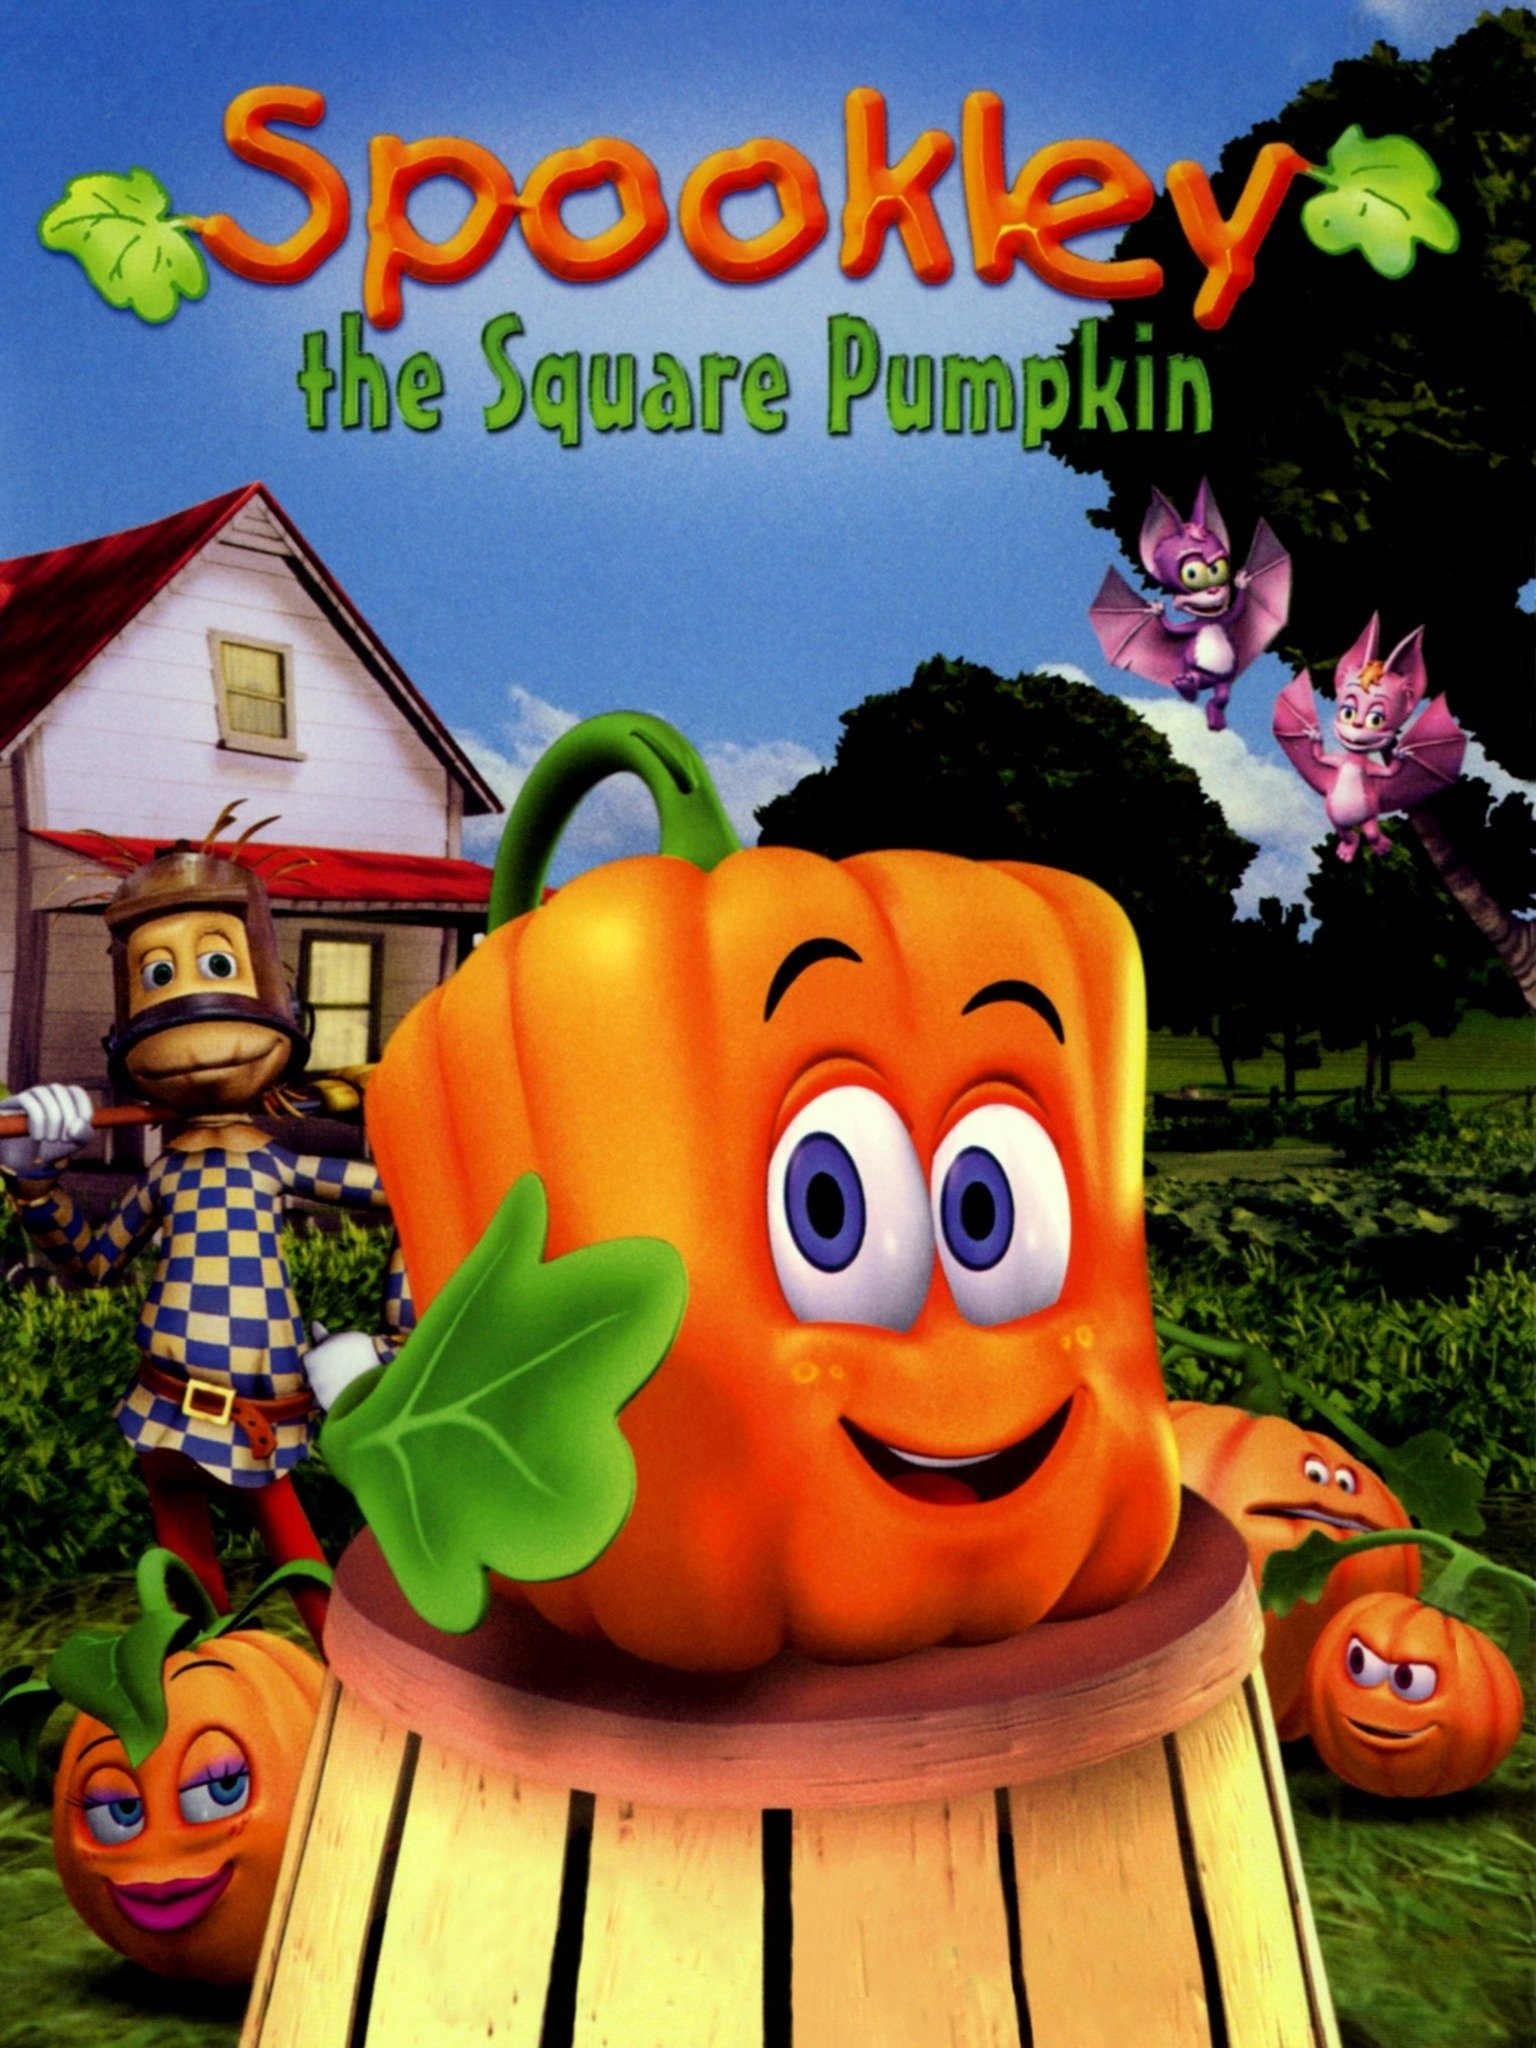 spookley the square pumpkin streaming